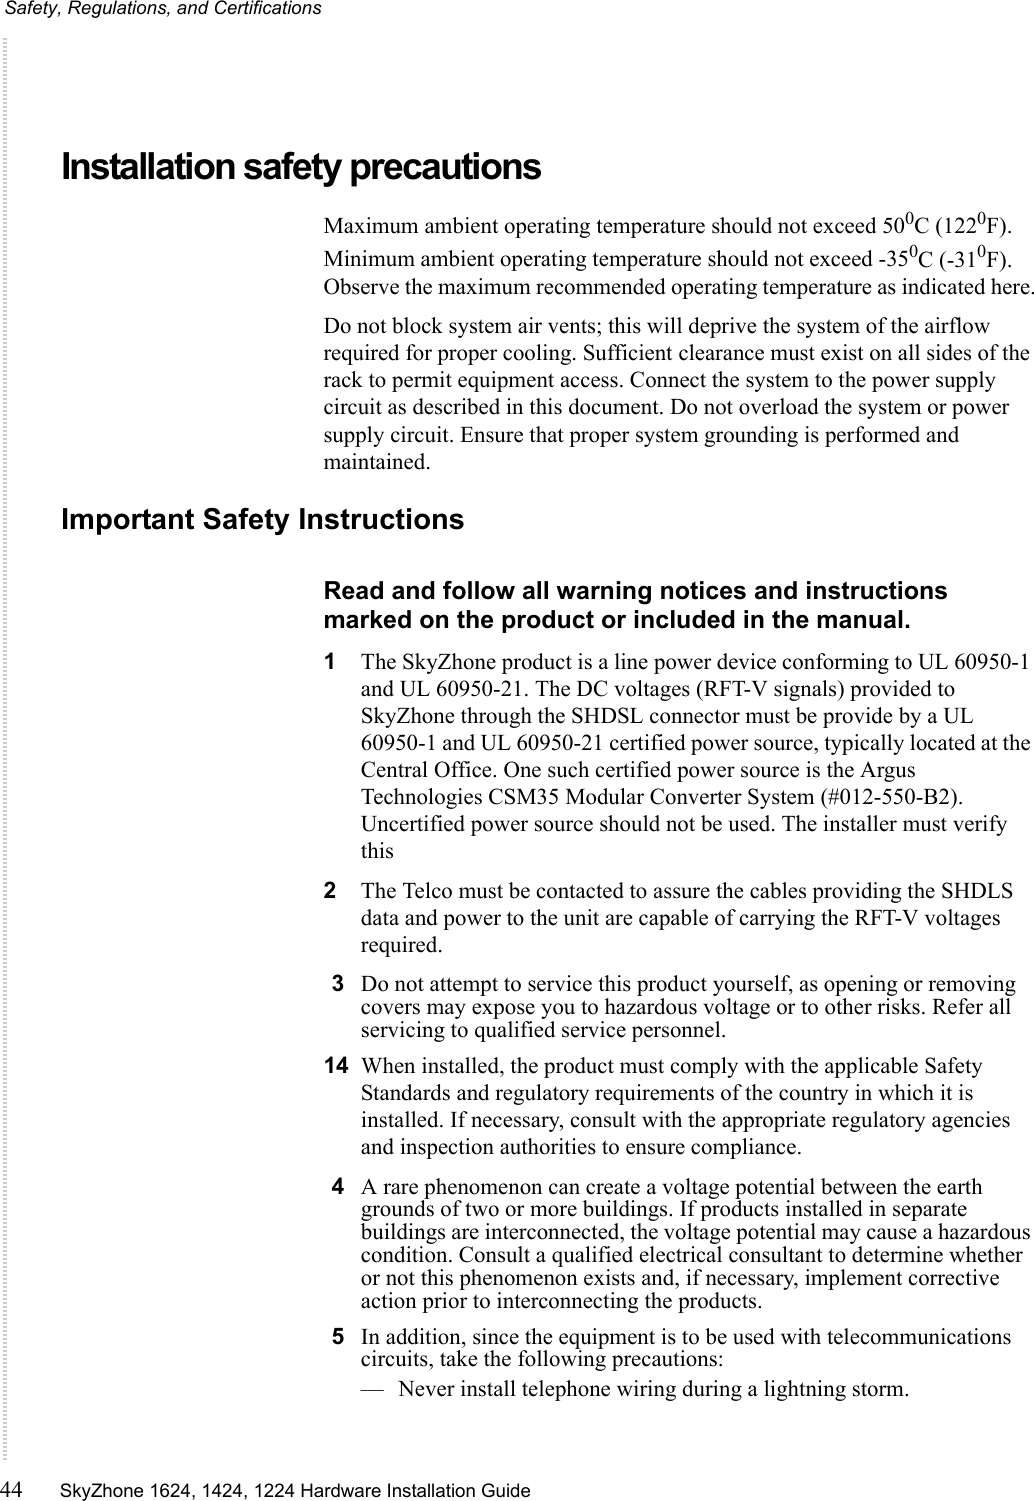 Safety, Regulations, and Certifications44 SkyZhone 1624, 1424, 1224 Hardware Installation Guide Installation safety precautionsMaximum ambient operating temperature should not exceed 500C (1220F). Minimum ambient operating temperature should not exceed -350C (-310F). Observe the maximum recommended operating temperature as indicated here.Do not block system air vents; this will deprive the system of the airflow required for proper cooling. Sufficient clearance must exist on all sides of the rack to permit equipment access. Connect the system to the power supply circuit as described in this document. Do not overload the system or power supply circuit. Ensure that proper system grounding is performed and maintained.Important Safety InstructionsRead and follow all warning notices and instructions marked on the product or included in the manual.1The SkyZhone product is a line power device conforming to UL 60950-1 and UL 60950-21. The DC voltages (RFT-V signals) provided to SkyZhone through the SHDSL connector must be provide by a UL 60950-1 and UL 60950-21 certified power source, typically located at the Central Office. One such certified power source is the Argus Technologies CSM35 Modular Converter System (#012-550-B2). Uncertified power source should not be used. The installer must verify this2The Telco must be contacted to assure the cables providing the SHDLS data and power to the unit are capable of carrying the RFT-V voltages required.3Do not attempt to service this product yourself, as opening or removing covers may expose you to hazardous voltage or to other risks. Refer all servicing to qualified service personnel.14 When installed, the product must comply with the applicable Safety Standards and regulatory requirements of the country in which it is installed. If necessary, consult with the appropriate regulatory agencies and inspection authorities to ensure compliance.4A rare phenomenon can create a voltage potential between the earth grounds of two or more buildings. If products installed in separate buildings are interconnected, the voltage potential may cause a hazardous condition. Consult a qualified electrical consultant to determine whether or not this phenomenon exists and, if necessary, implement corrective action prior to interconnecting the products.5In addition, since the equipment is to be used with telecommunications circuits, take the following precautions:— Never install telephone wiring during a lightning storm.